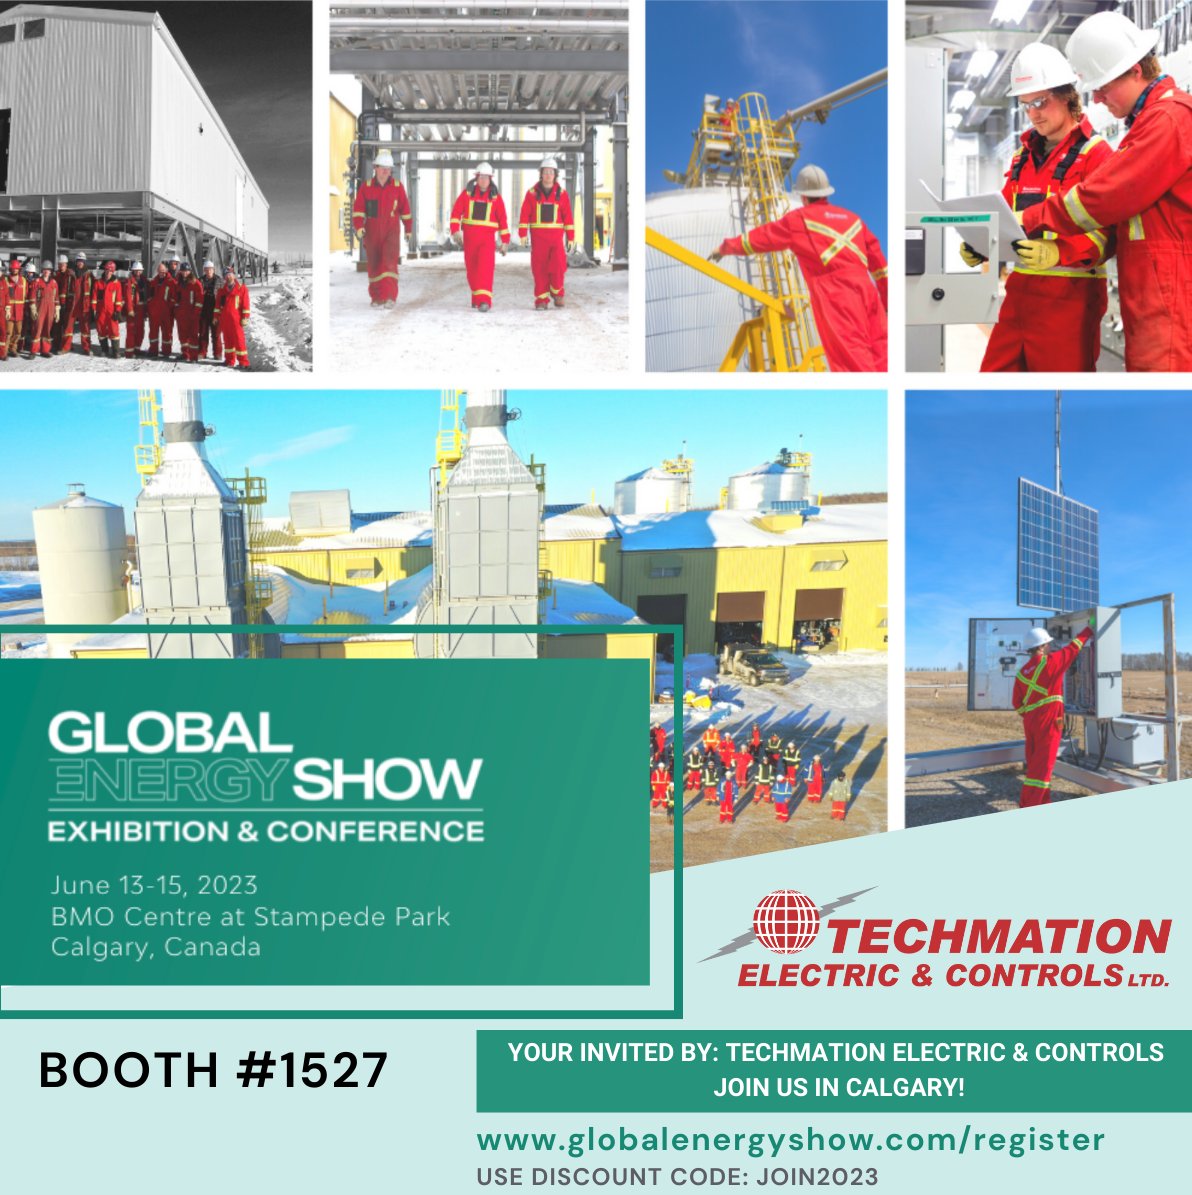 YOU'RE INVITED to join us at the Global Energy Show at the BMO Centre in Calgary. 
June 13-15th, 2023

To attend the Global Energy Show 2023, click here for a complimentary visitor pass. Use discount code: JOIN2023

globalenergyshow.com/register/        

 #globalenergyshow #techmation